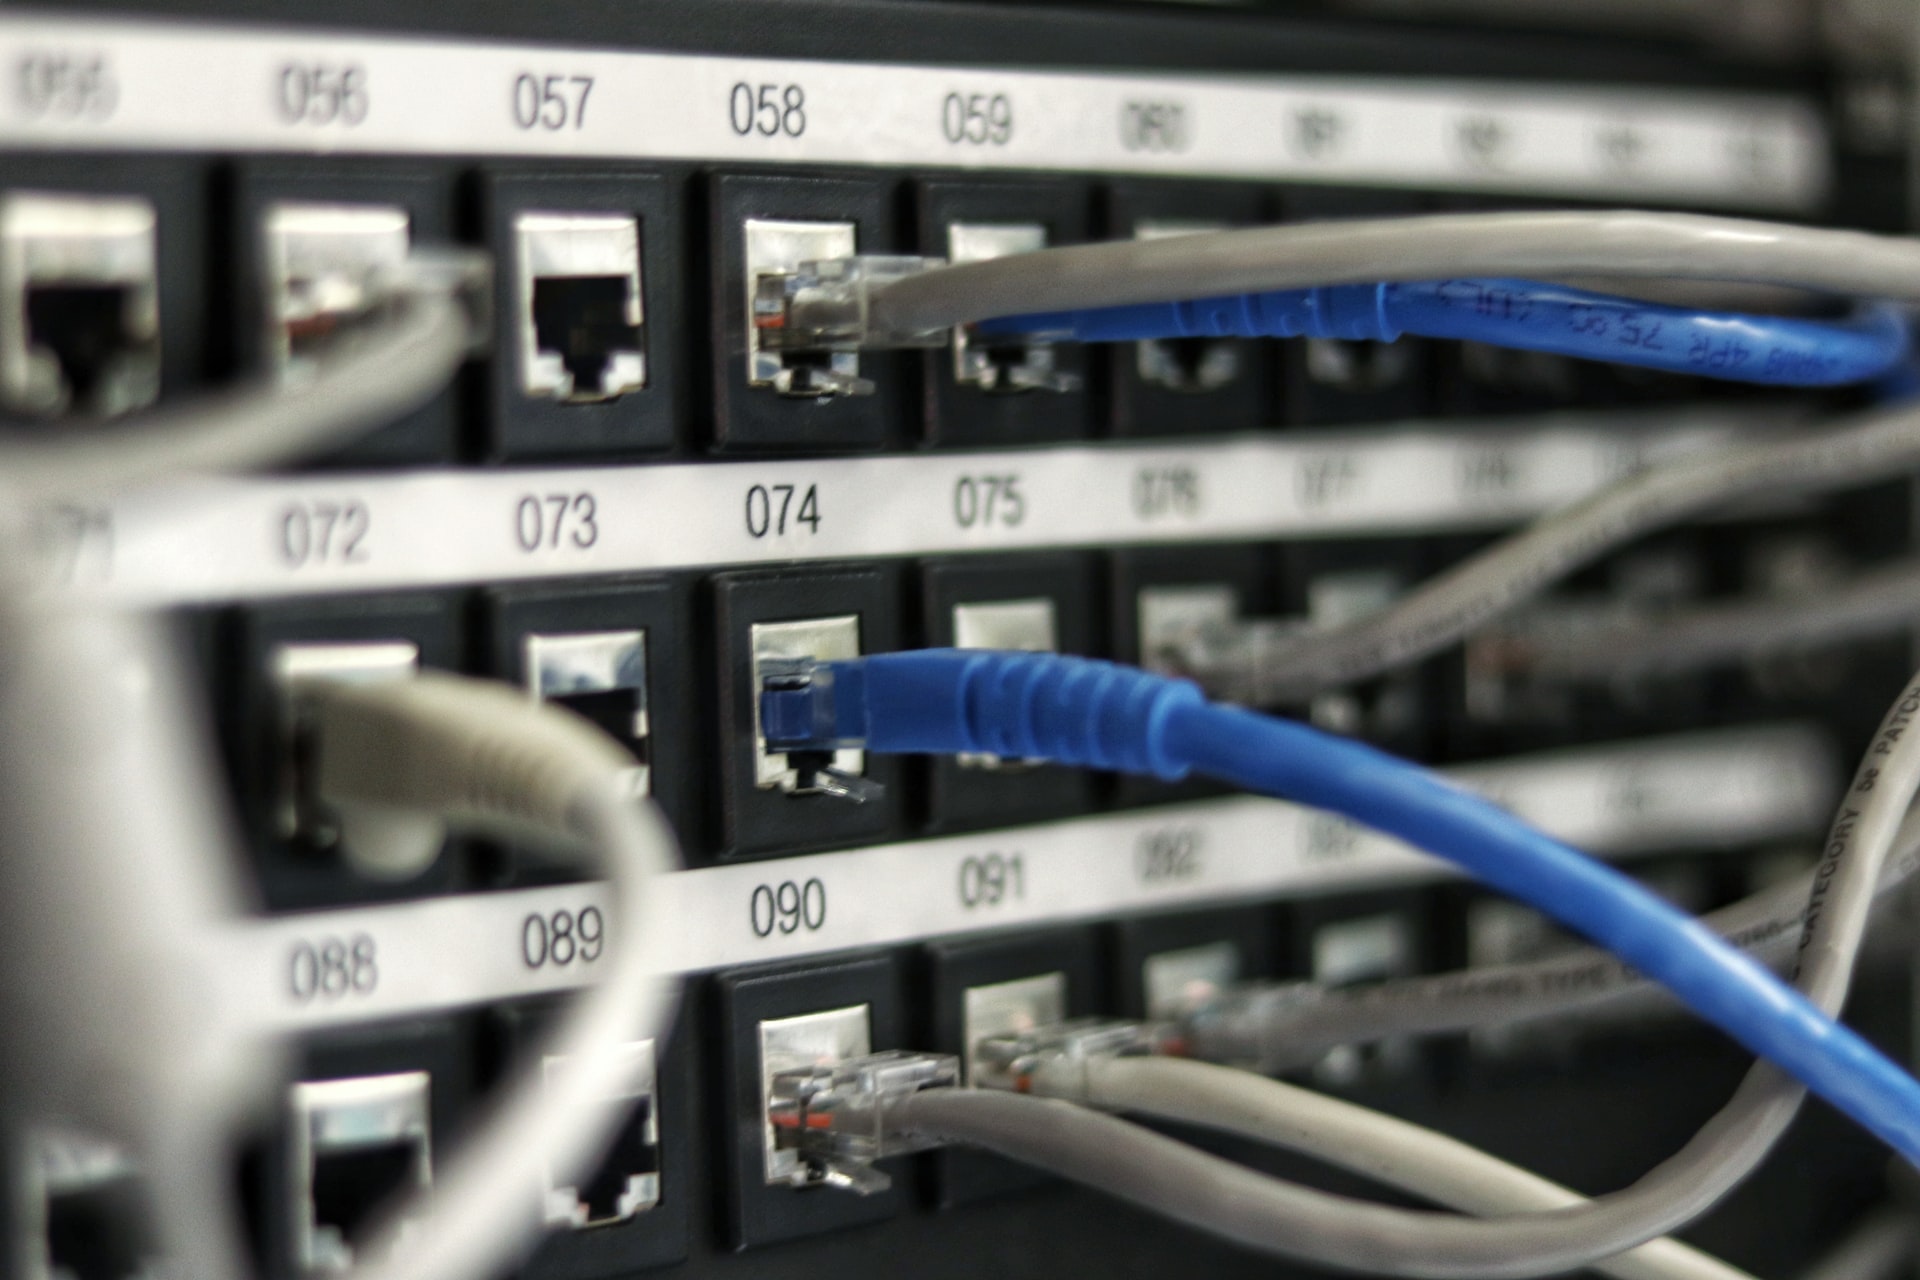 Concept Infoway has achieved “Networking Infrastructure” competency